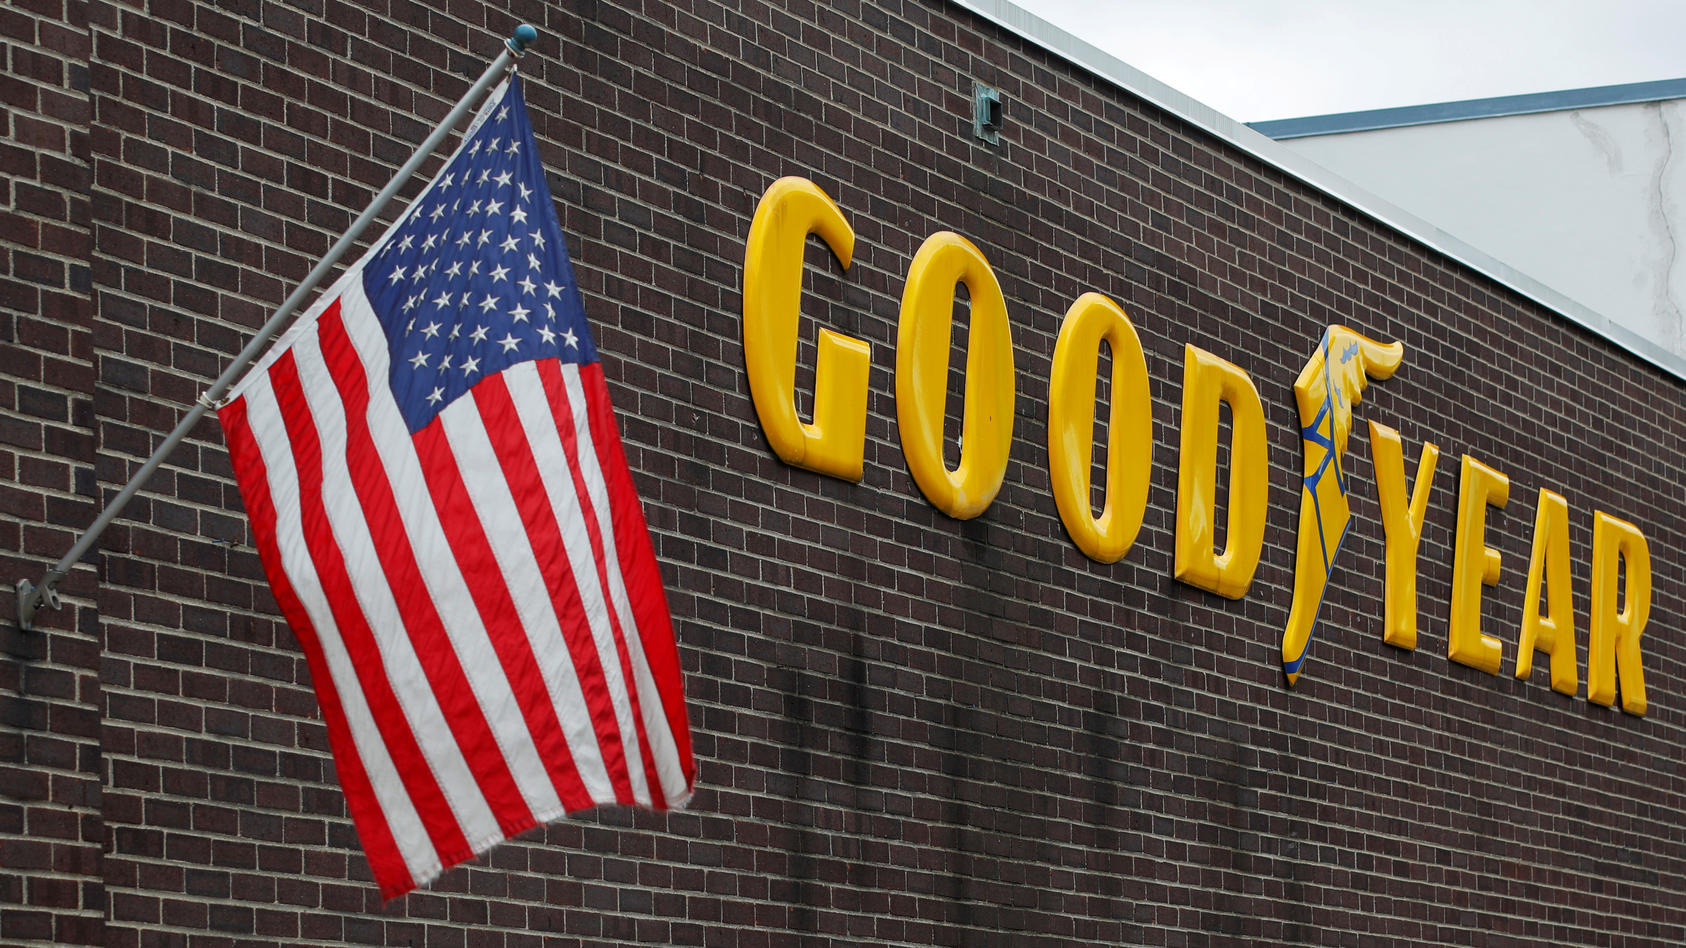 FILE PHOTO: A U.S. flag flies at a Goodyear Tire facility in Somerville, Massachusetts, U.S., July 25, 2017. REUTERS/Brian Snyder/File Photo